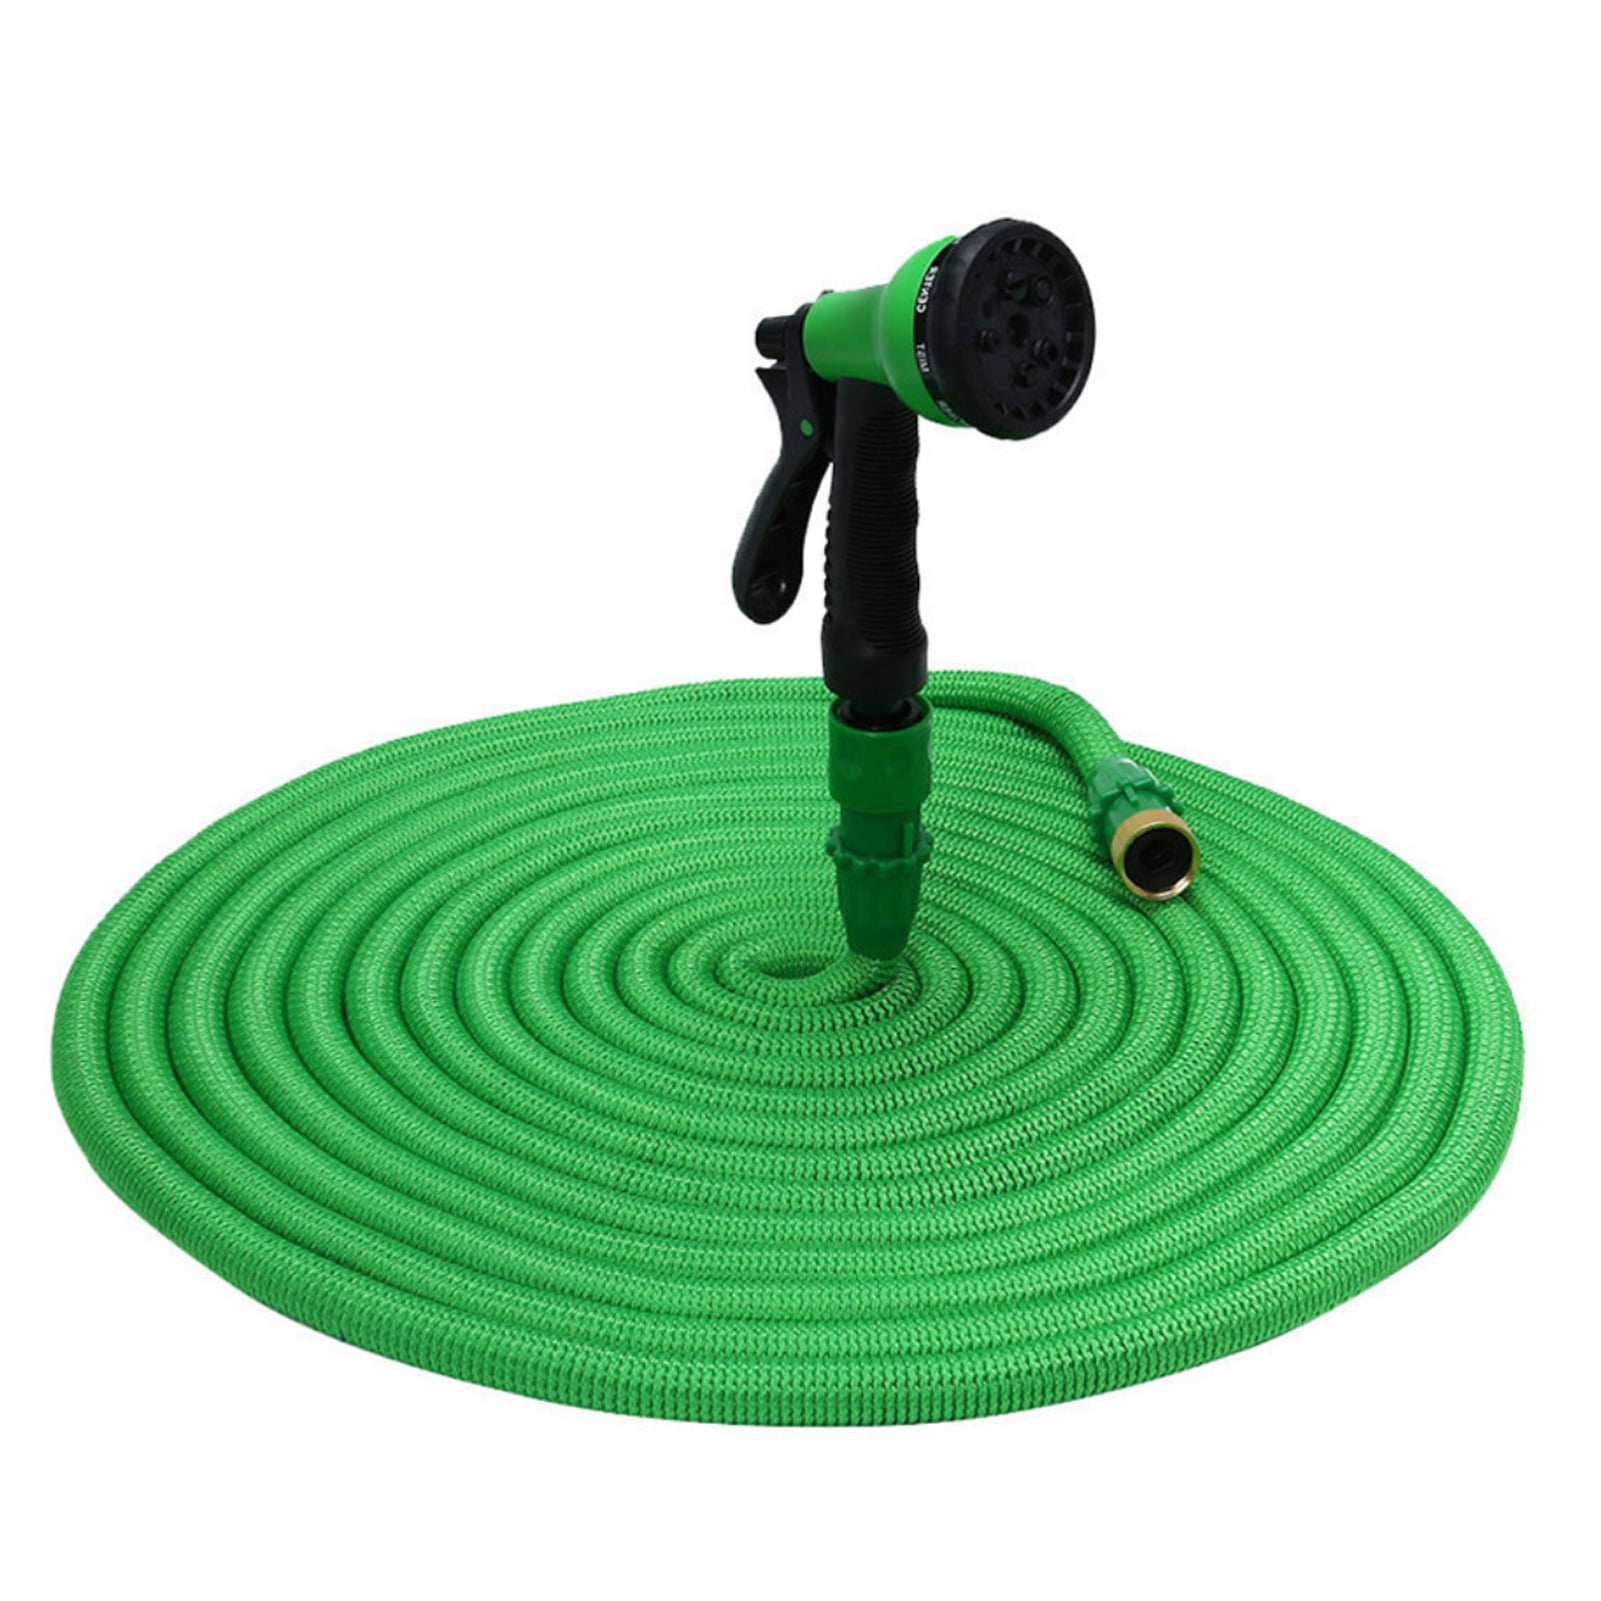 Water Hose Pipe for Yard Lawn Garden Watering Car Cleaning WESEN Garden Hose 125FT Expandable Hose with 8 Function Spray Nozzle Fitting Hose Connector Expanding Hosepipe Blue,125FT